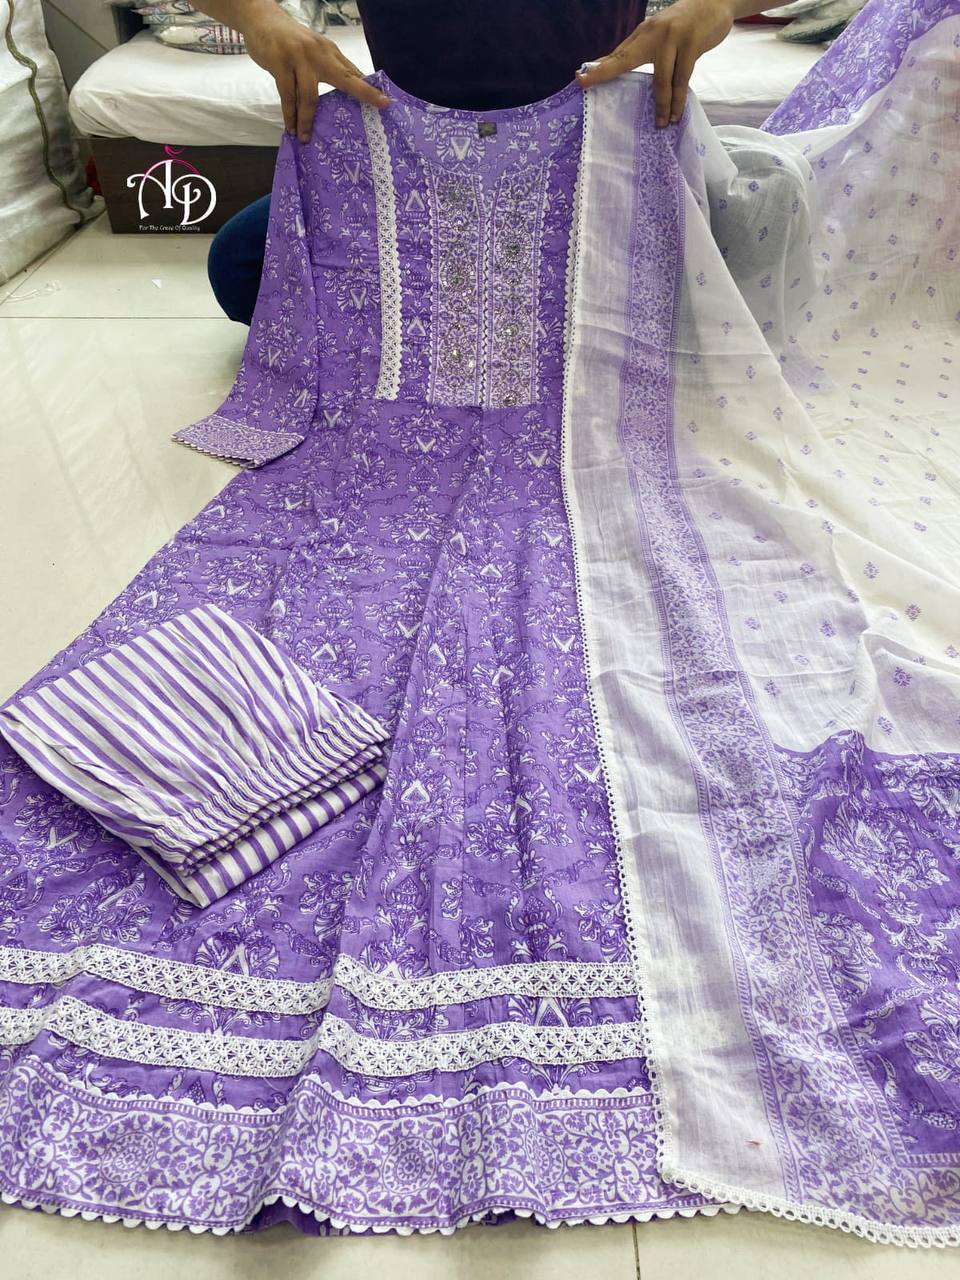 Experience Timeless Elegance with Our Anarkali Suit